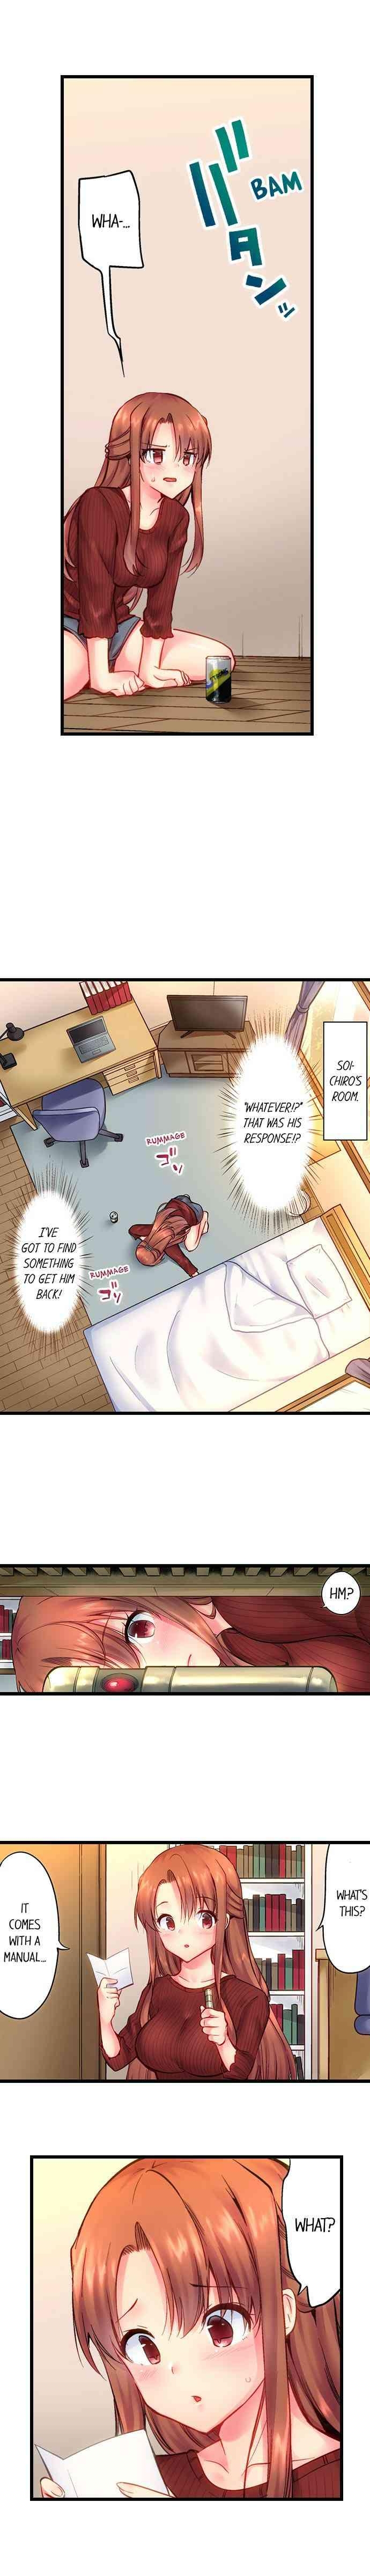 [Yuuki HB] "Hypnotized" Sex with My Brother Ch.21/? [English] [Ongoing] 4